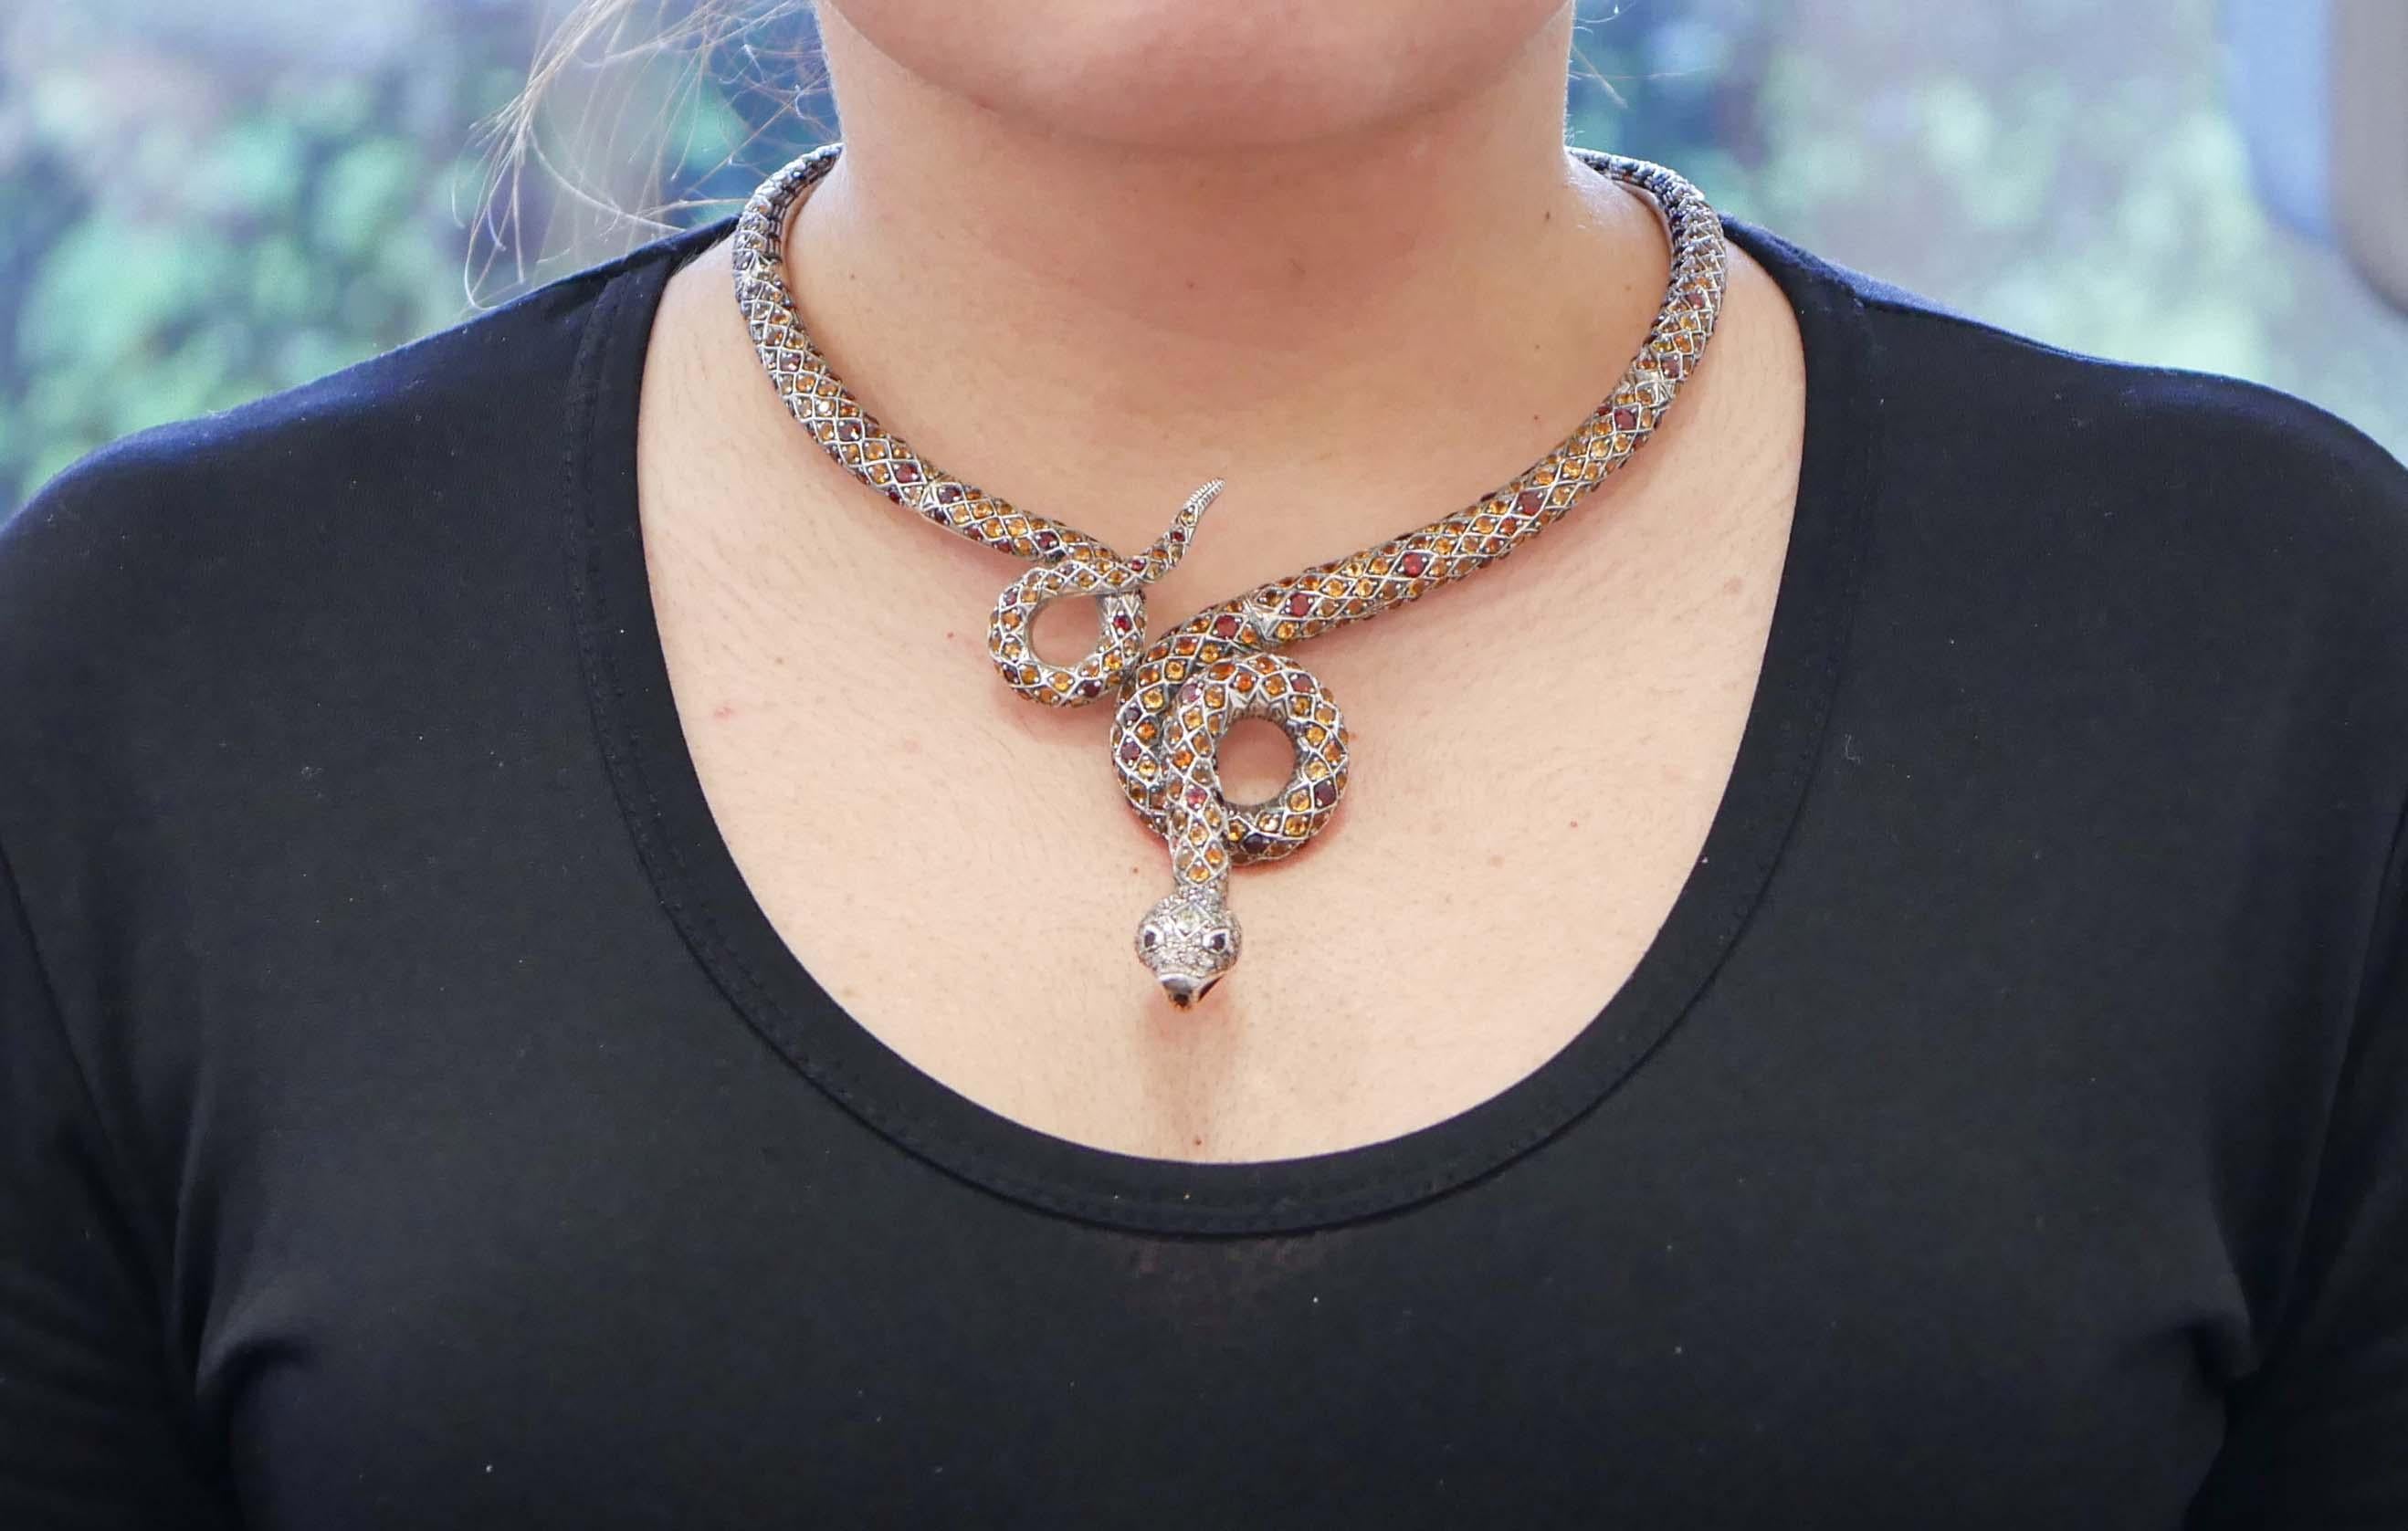 Mixed Cut Diamonds, Topazs, Garnets, Rose Gold and Silver Snake Necklace